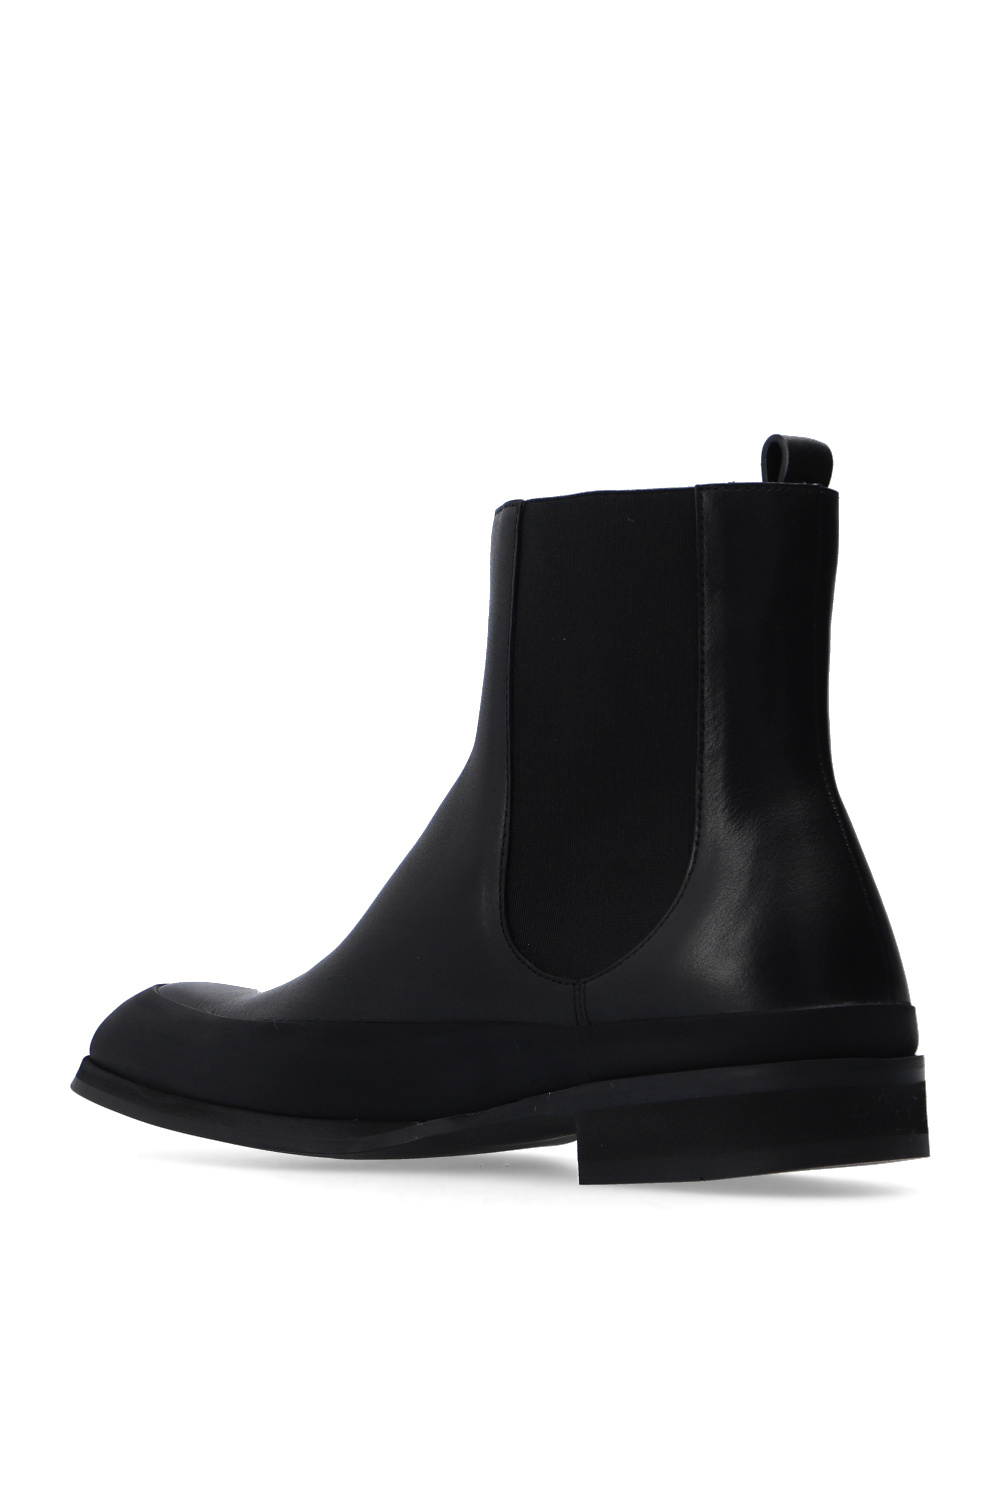 The Row ‘Garden Boot’ leather ankle boots